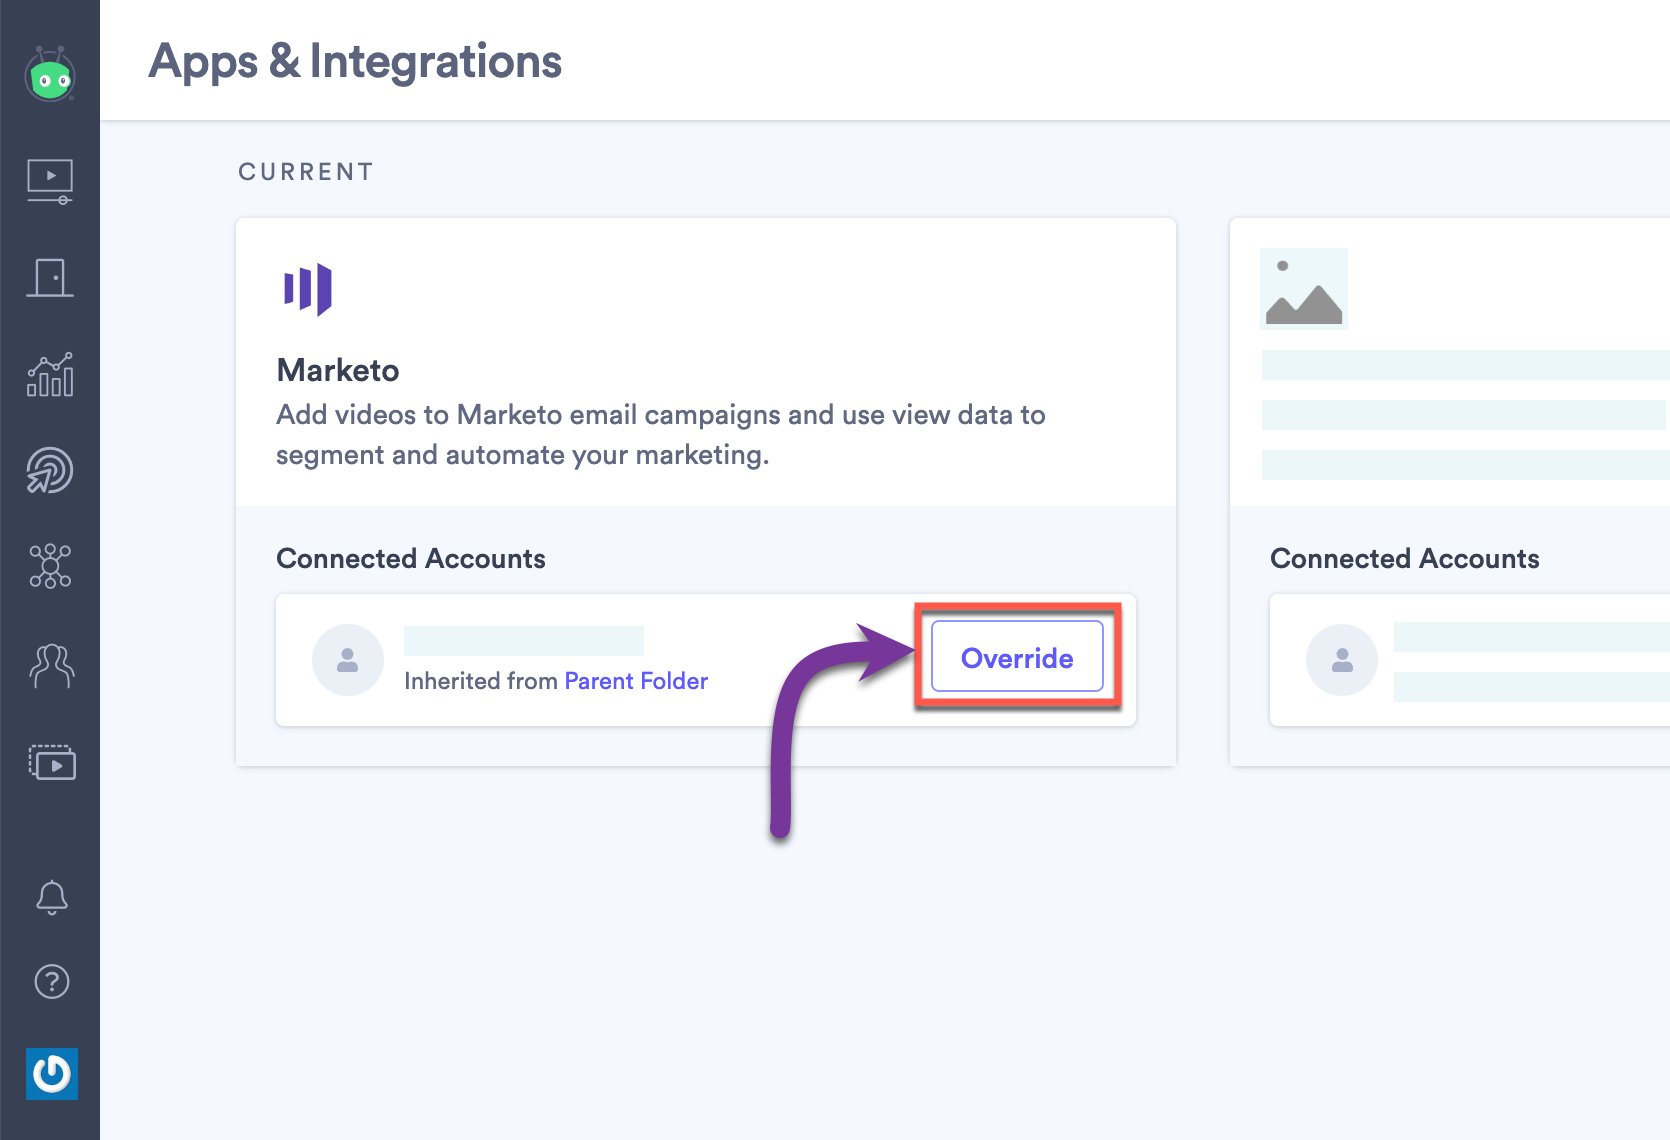 From the integrations page in Vidyard, indicating how you can use the Override button to connect a different Marketo workspace or partition to another folder